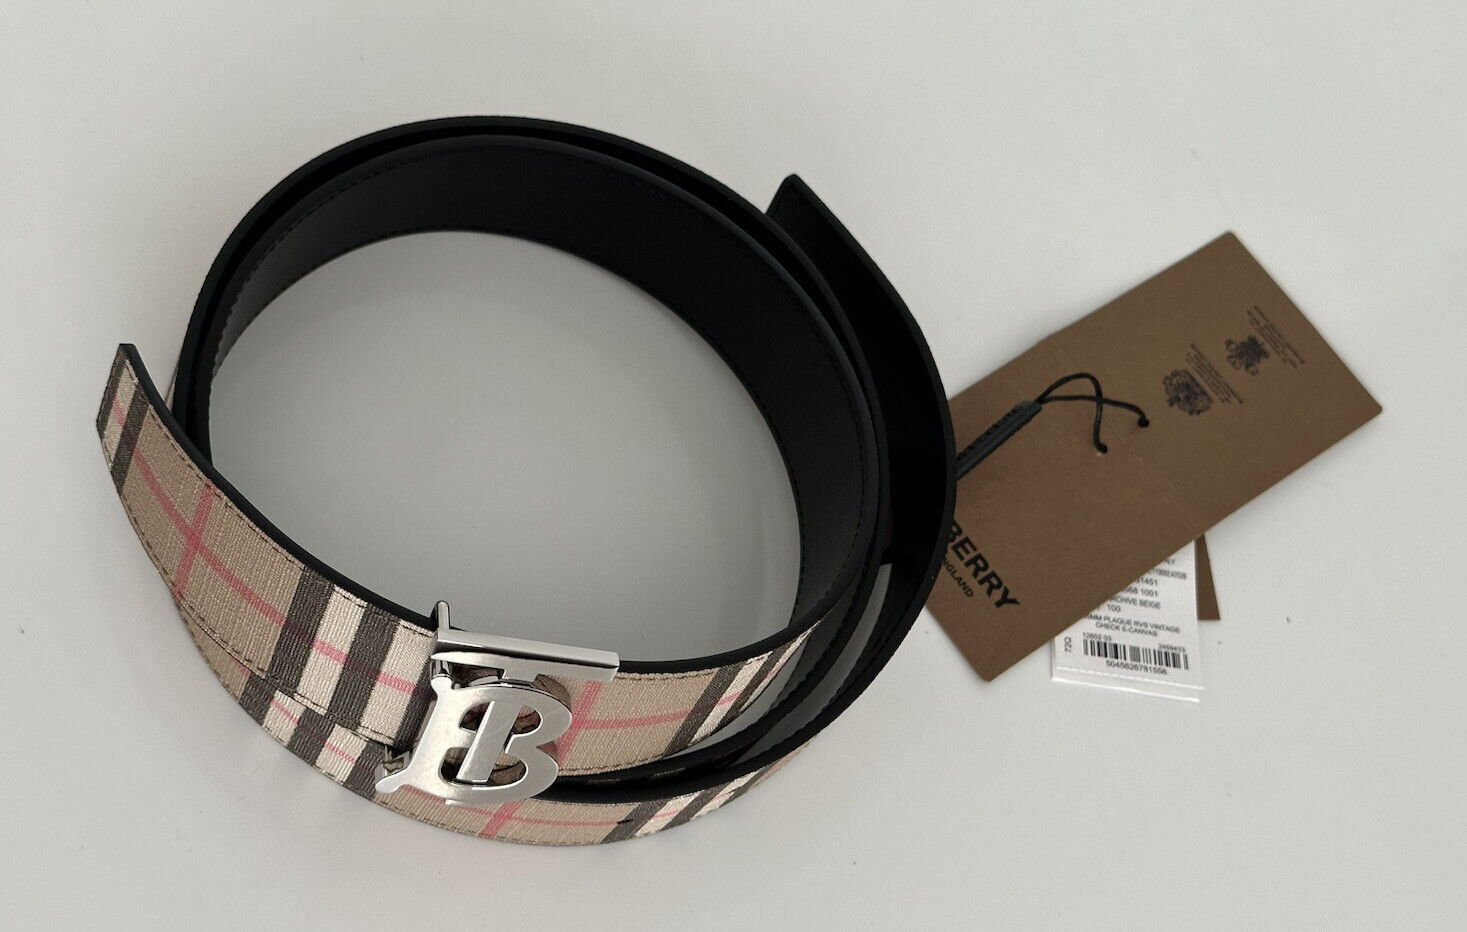 NWT $580 Burberry TB Leather Archive Beige Reversible Belt 38/95 8046568 Italy